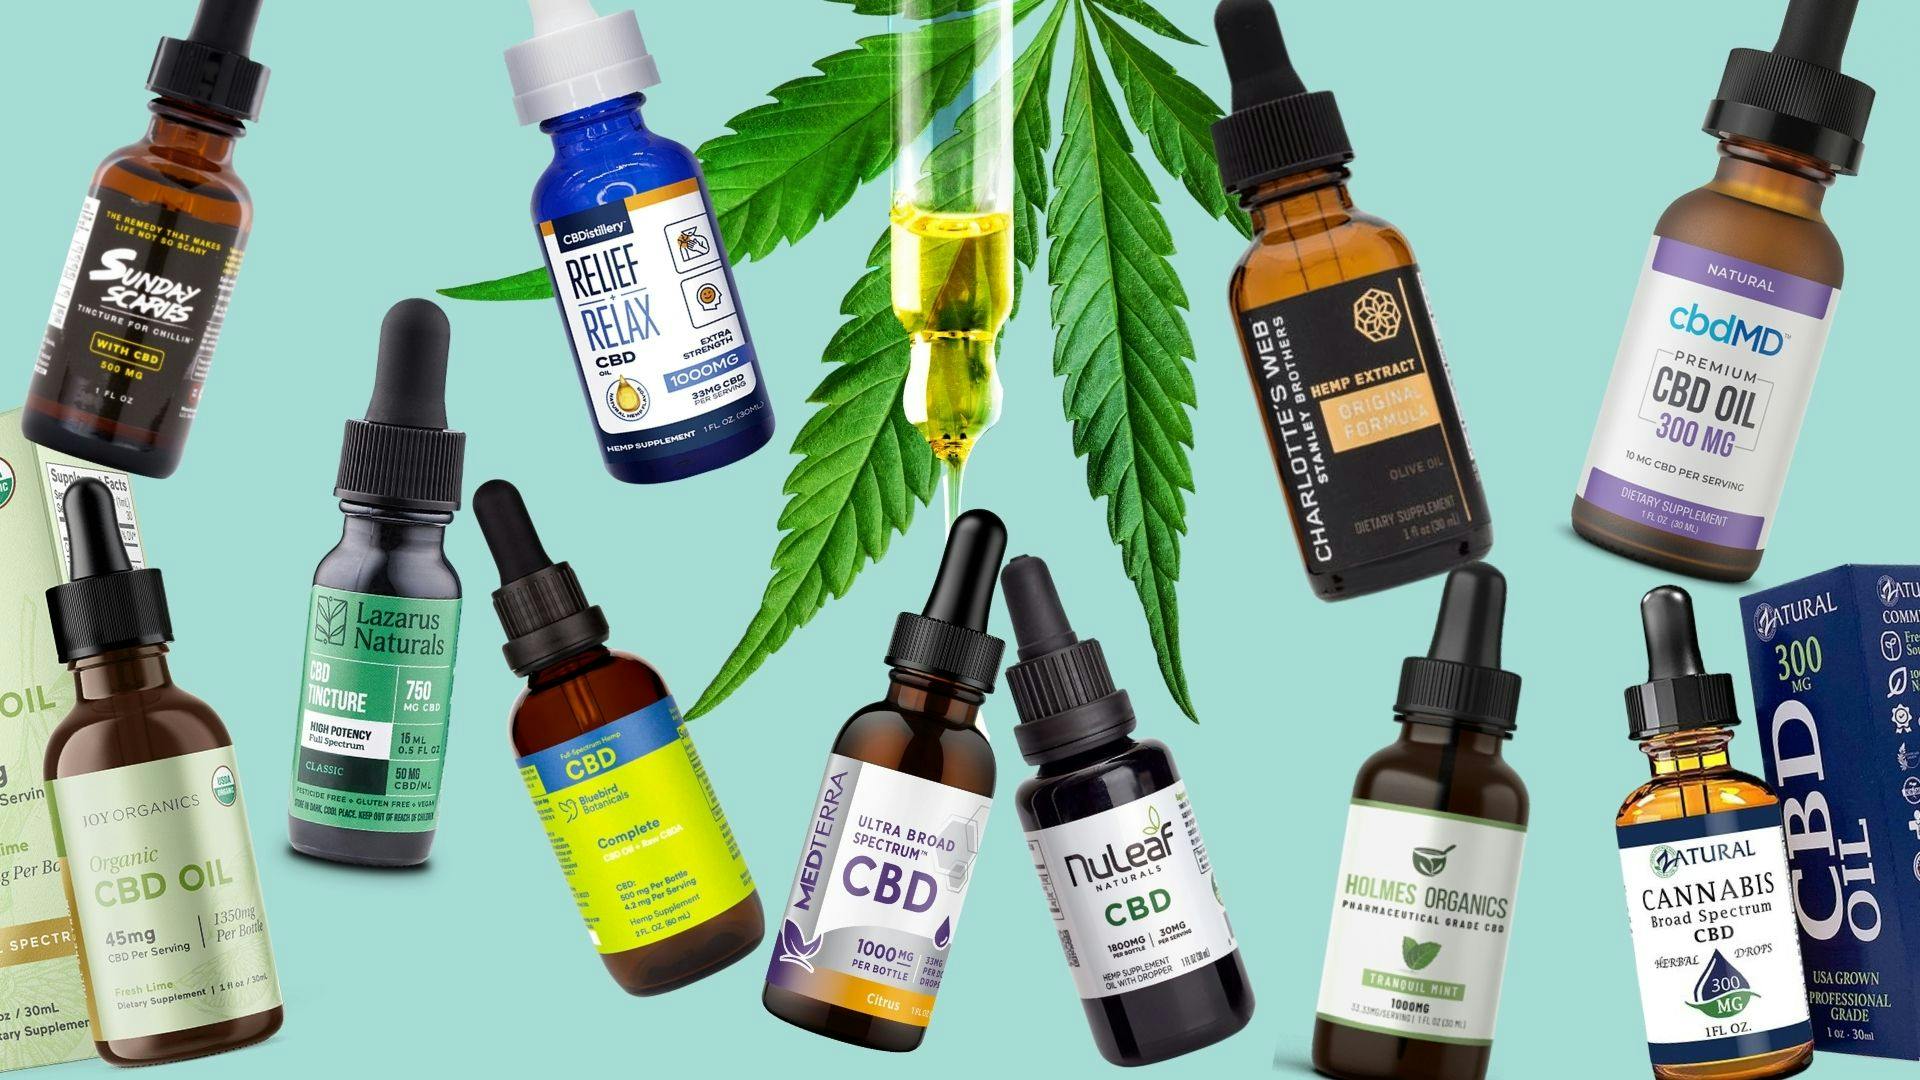 11 Top CBD Oils You Can Try WorryFree The Cannigma